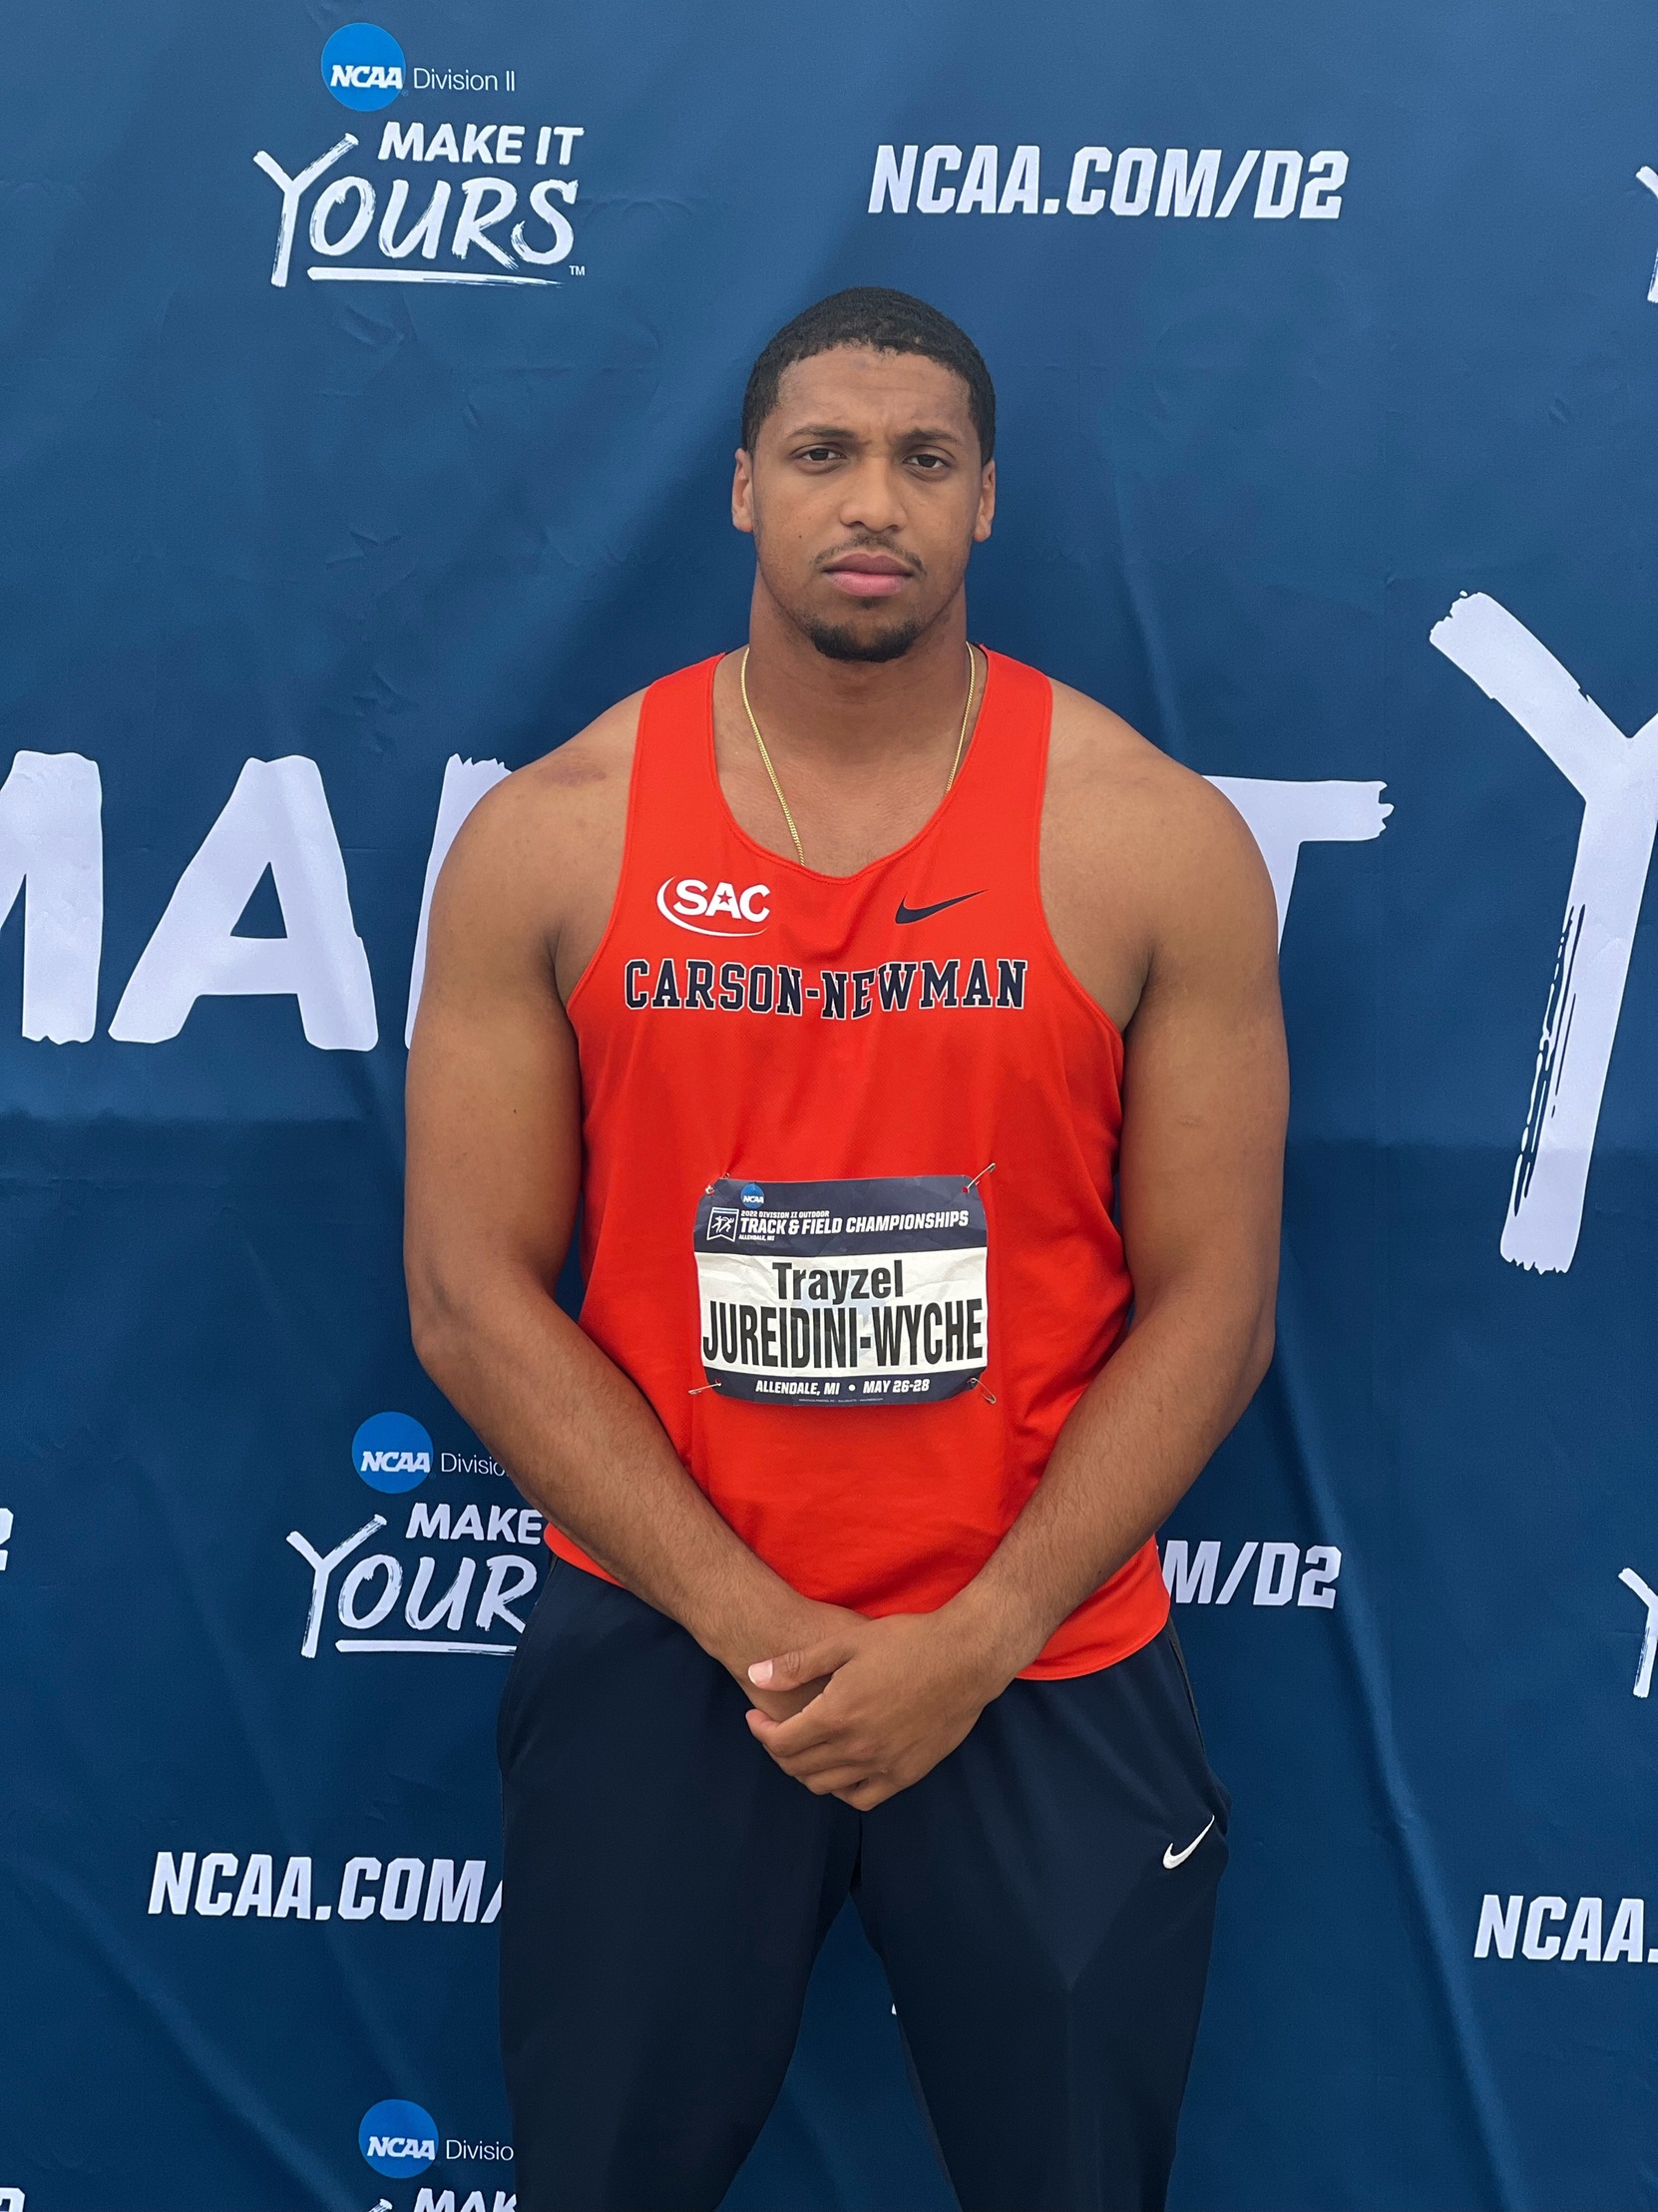 Jureidini-Wyche earns second team All-American honors at NCAA Championships